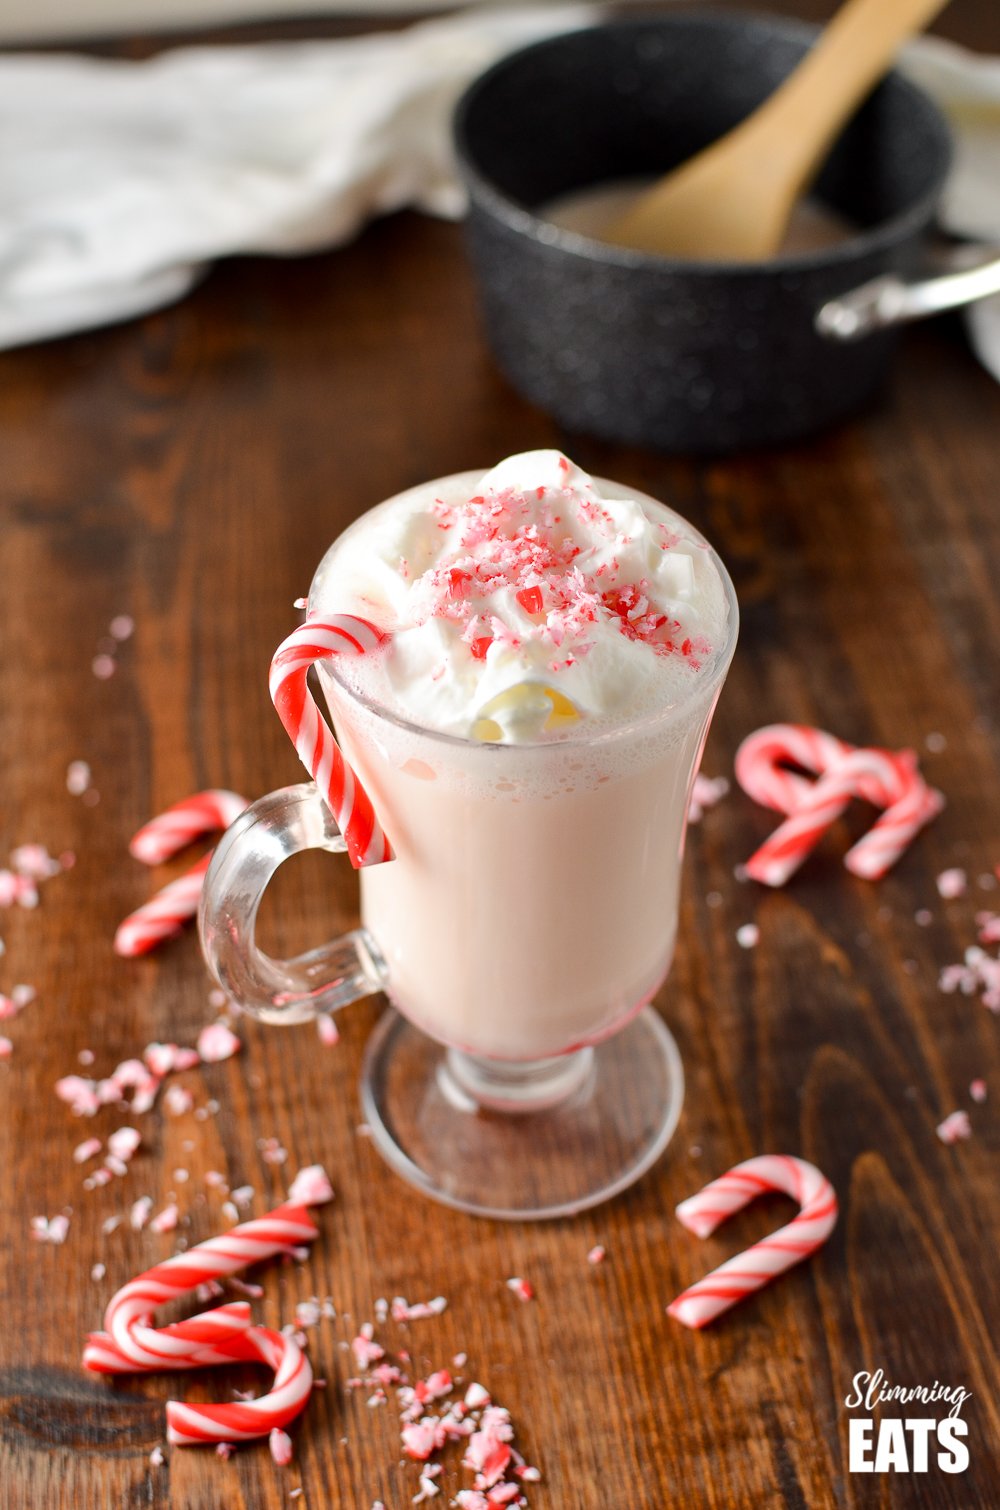 candy cane white hot chocolate in glass mug with saucepan in background and scattered broken candy canes